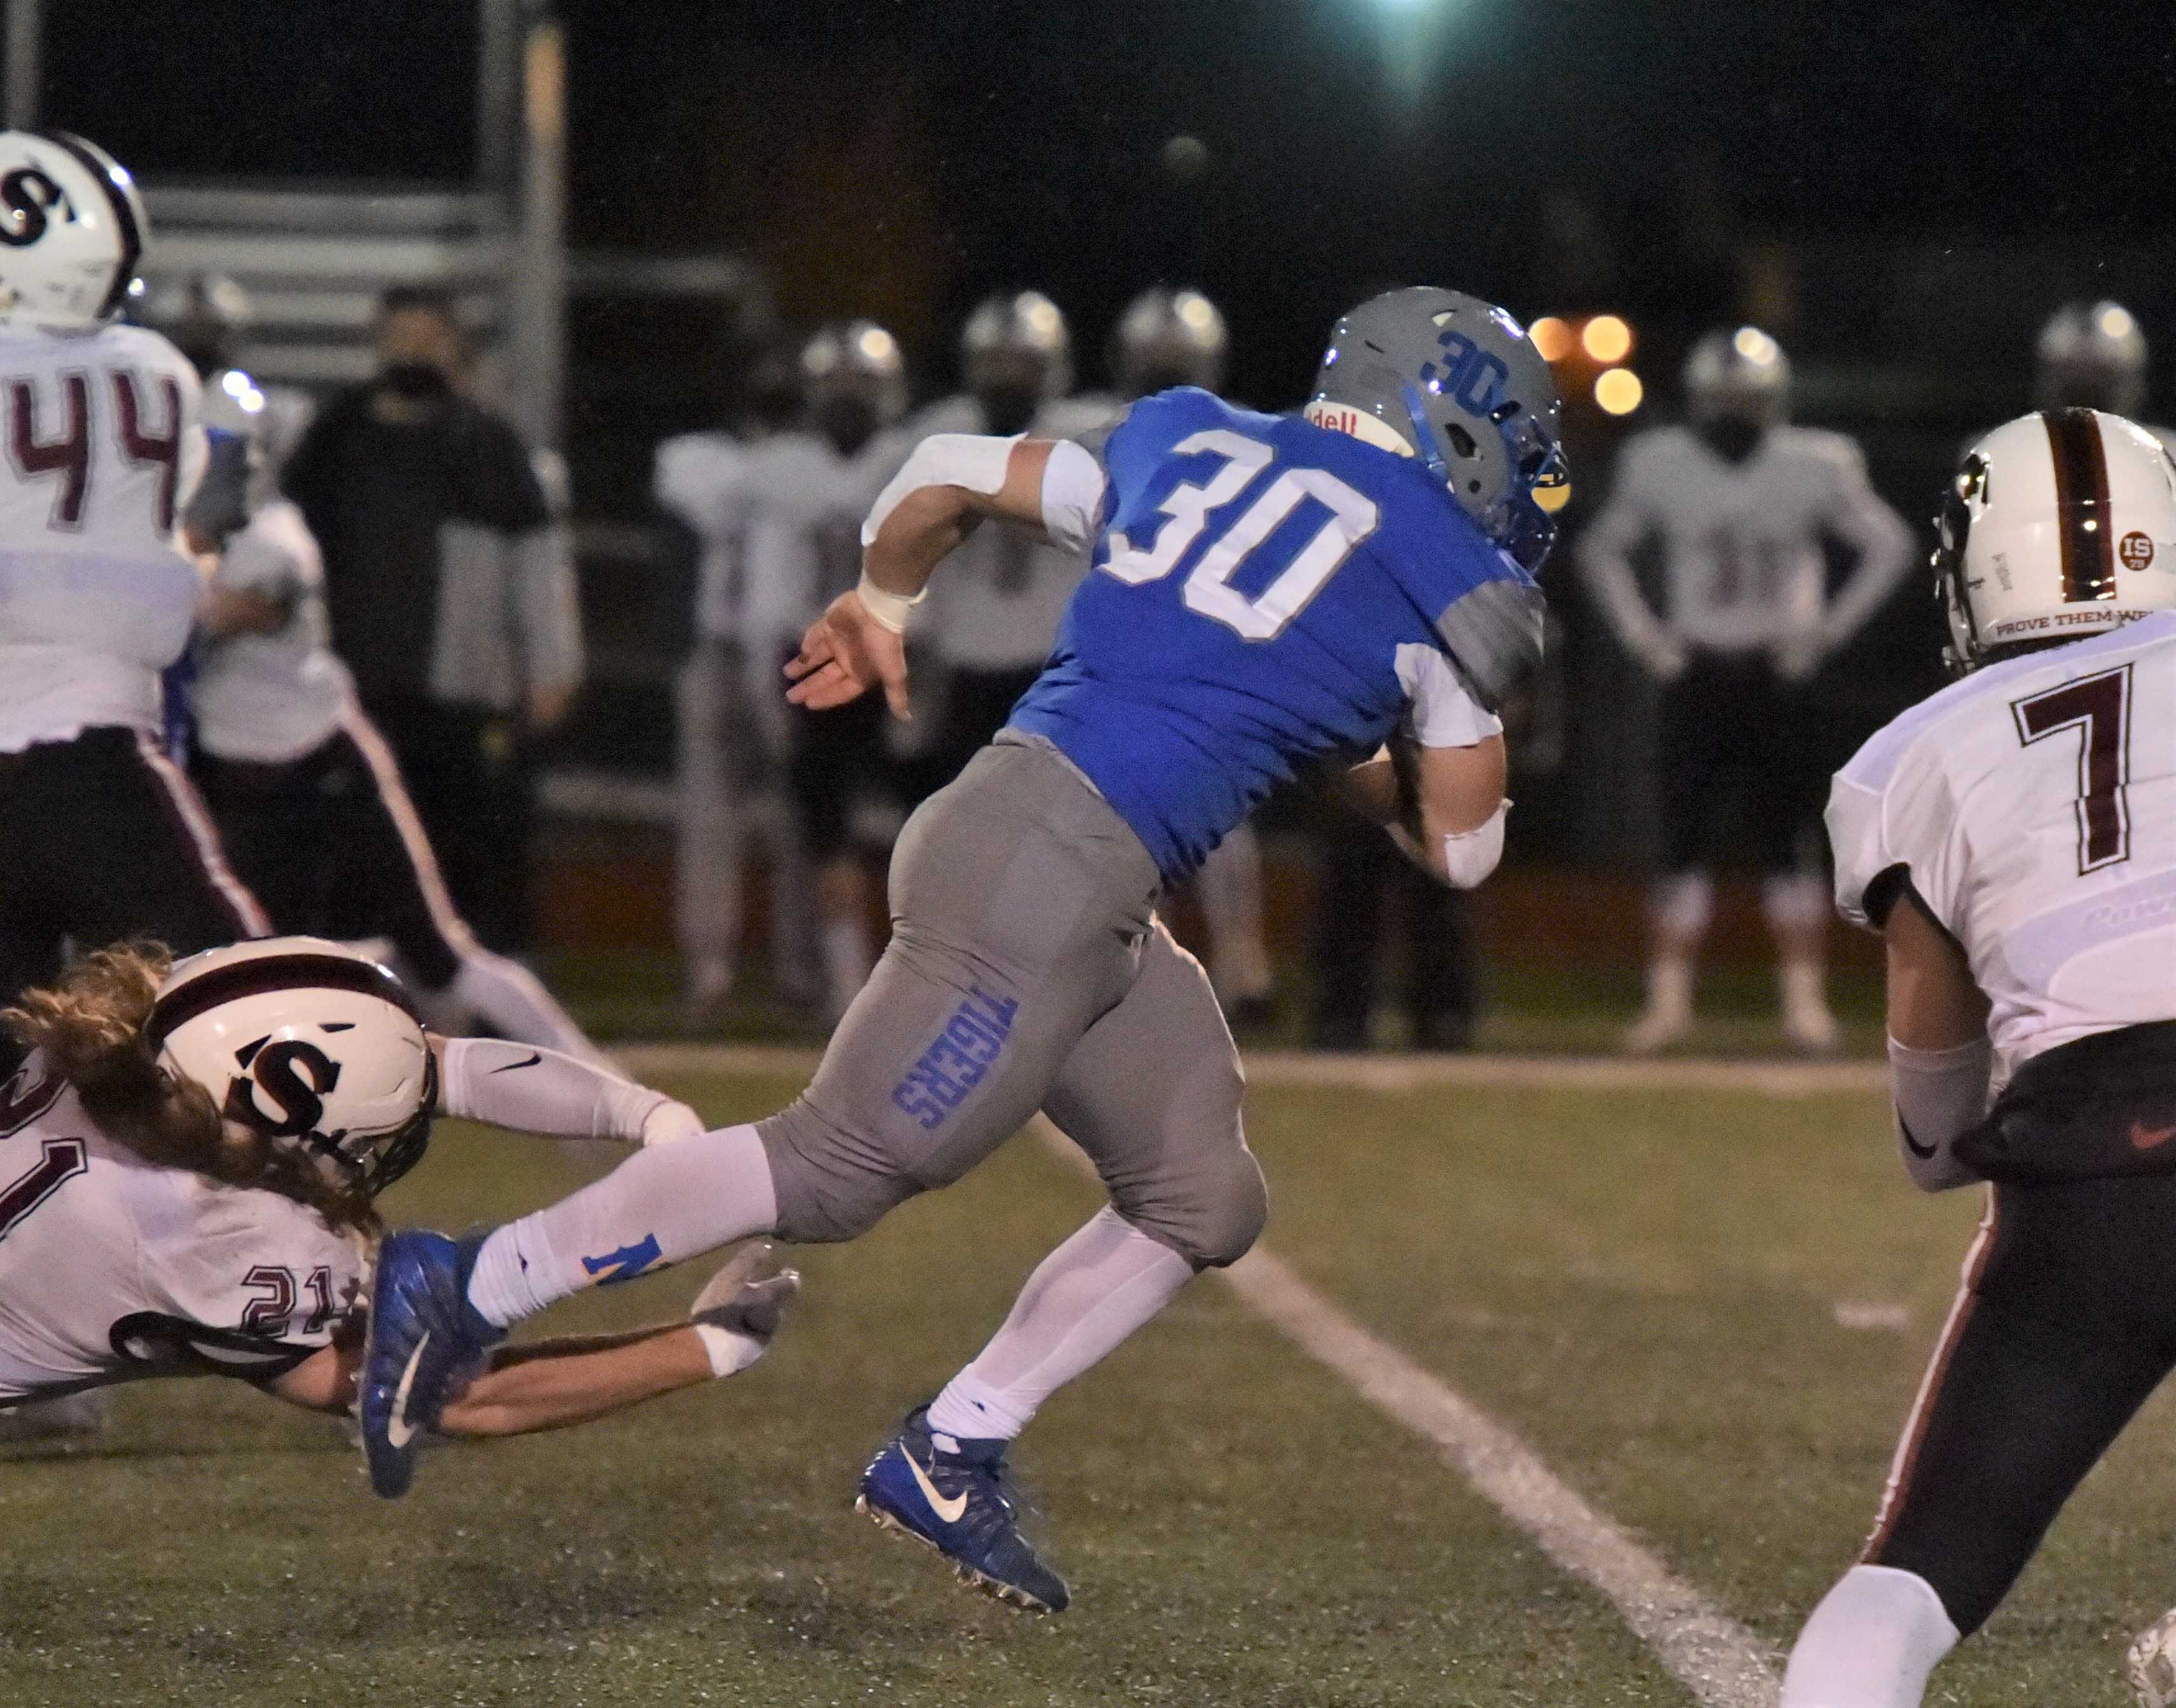 Newberg junior Price Pothier (5-6, 180) has rushed for 701 yards and 10 touchdowns. (Photo by Dean Takahashi)